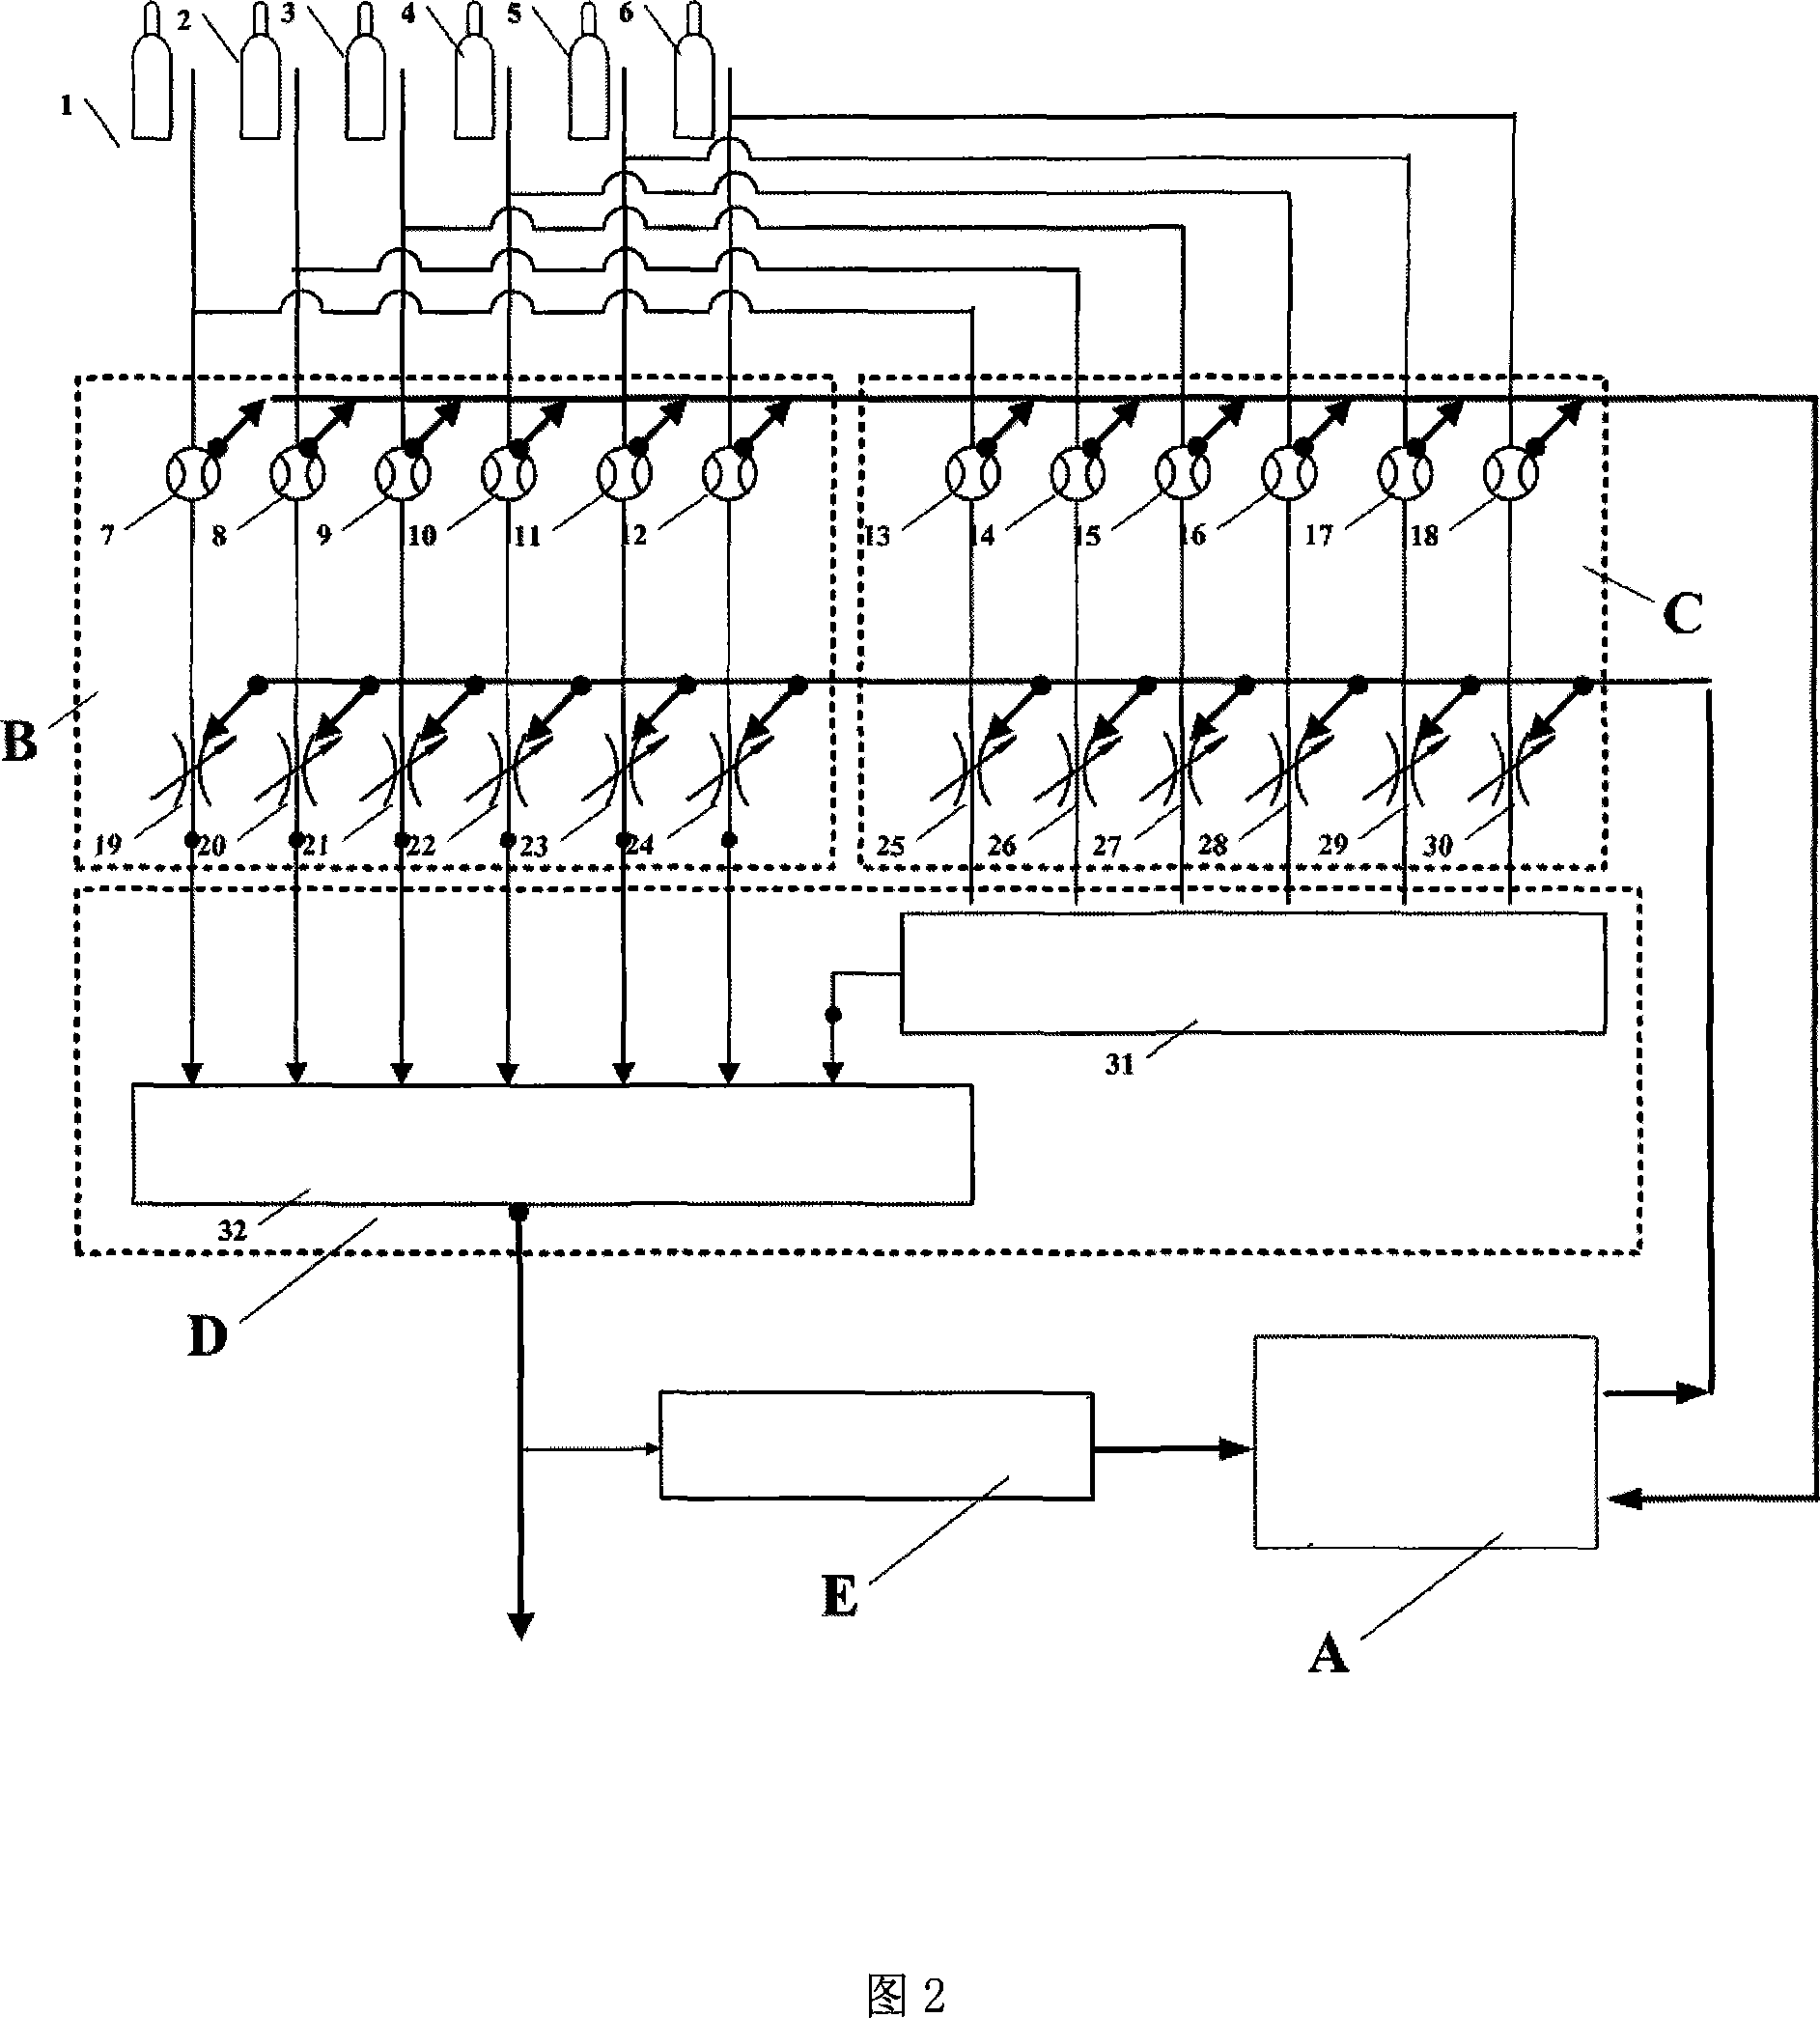 Multi-channel mixed gas formulating system